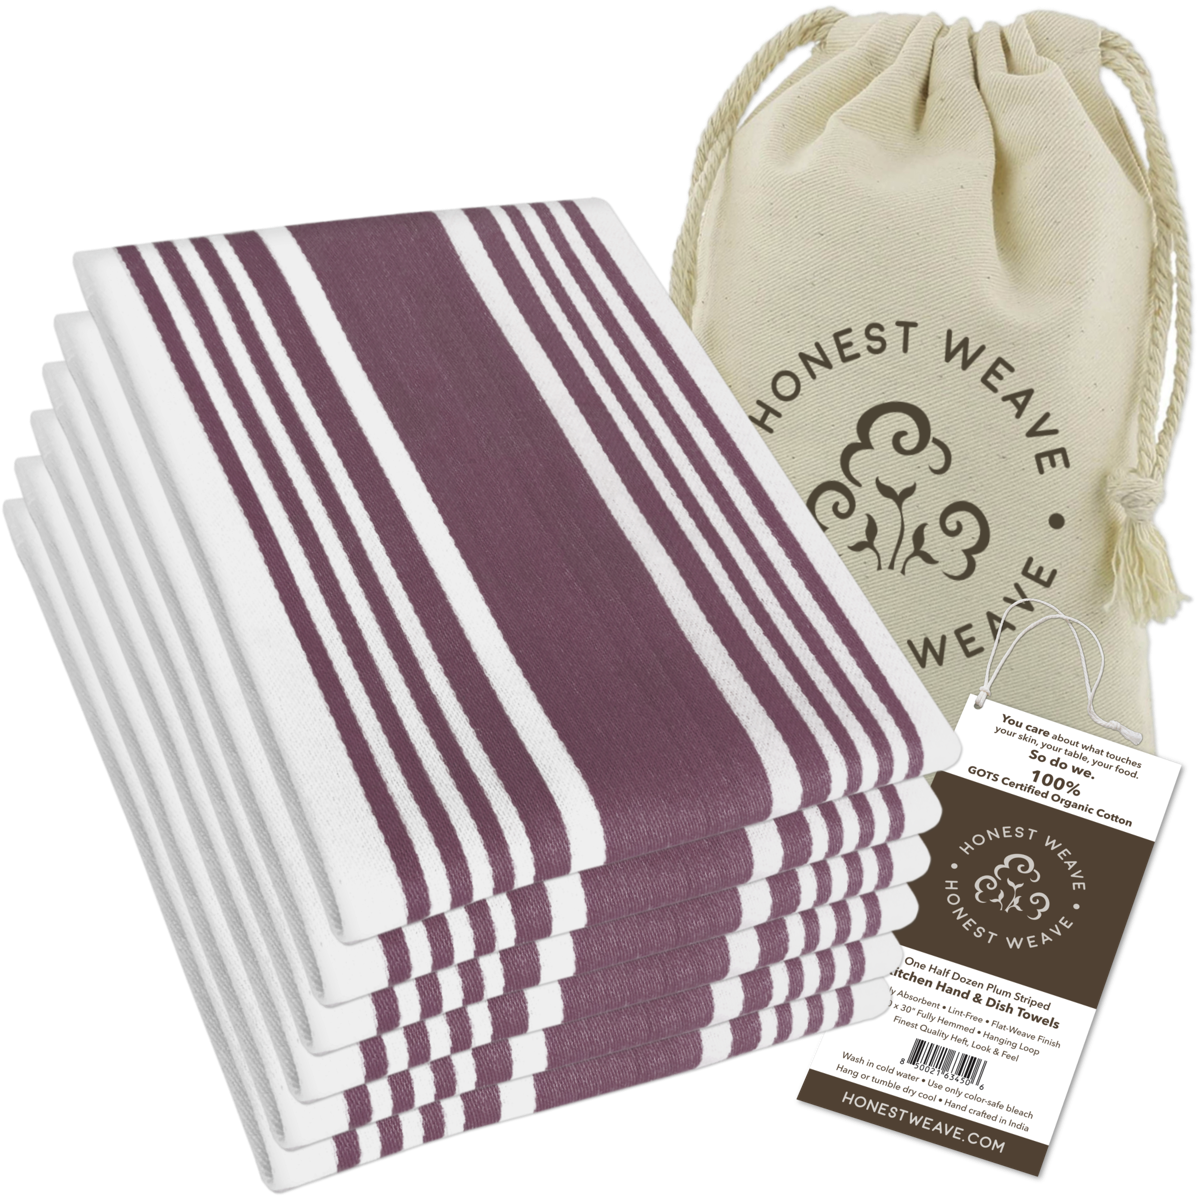 HONEST WEAVE GOTS Certified Organic Cotton Kitchen Hand and Dish Towel Sets  - Oversized 20x30 inches, Fully Hemmed, in Designer Colors, 6-Pack, Dusty